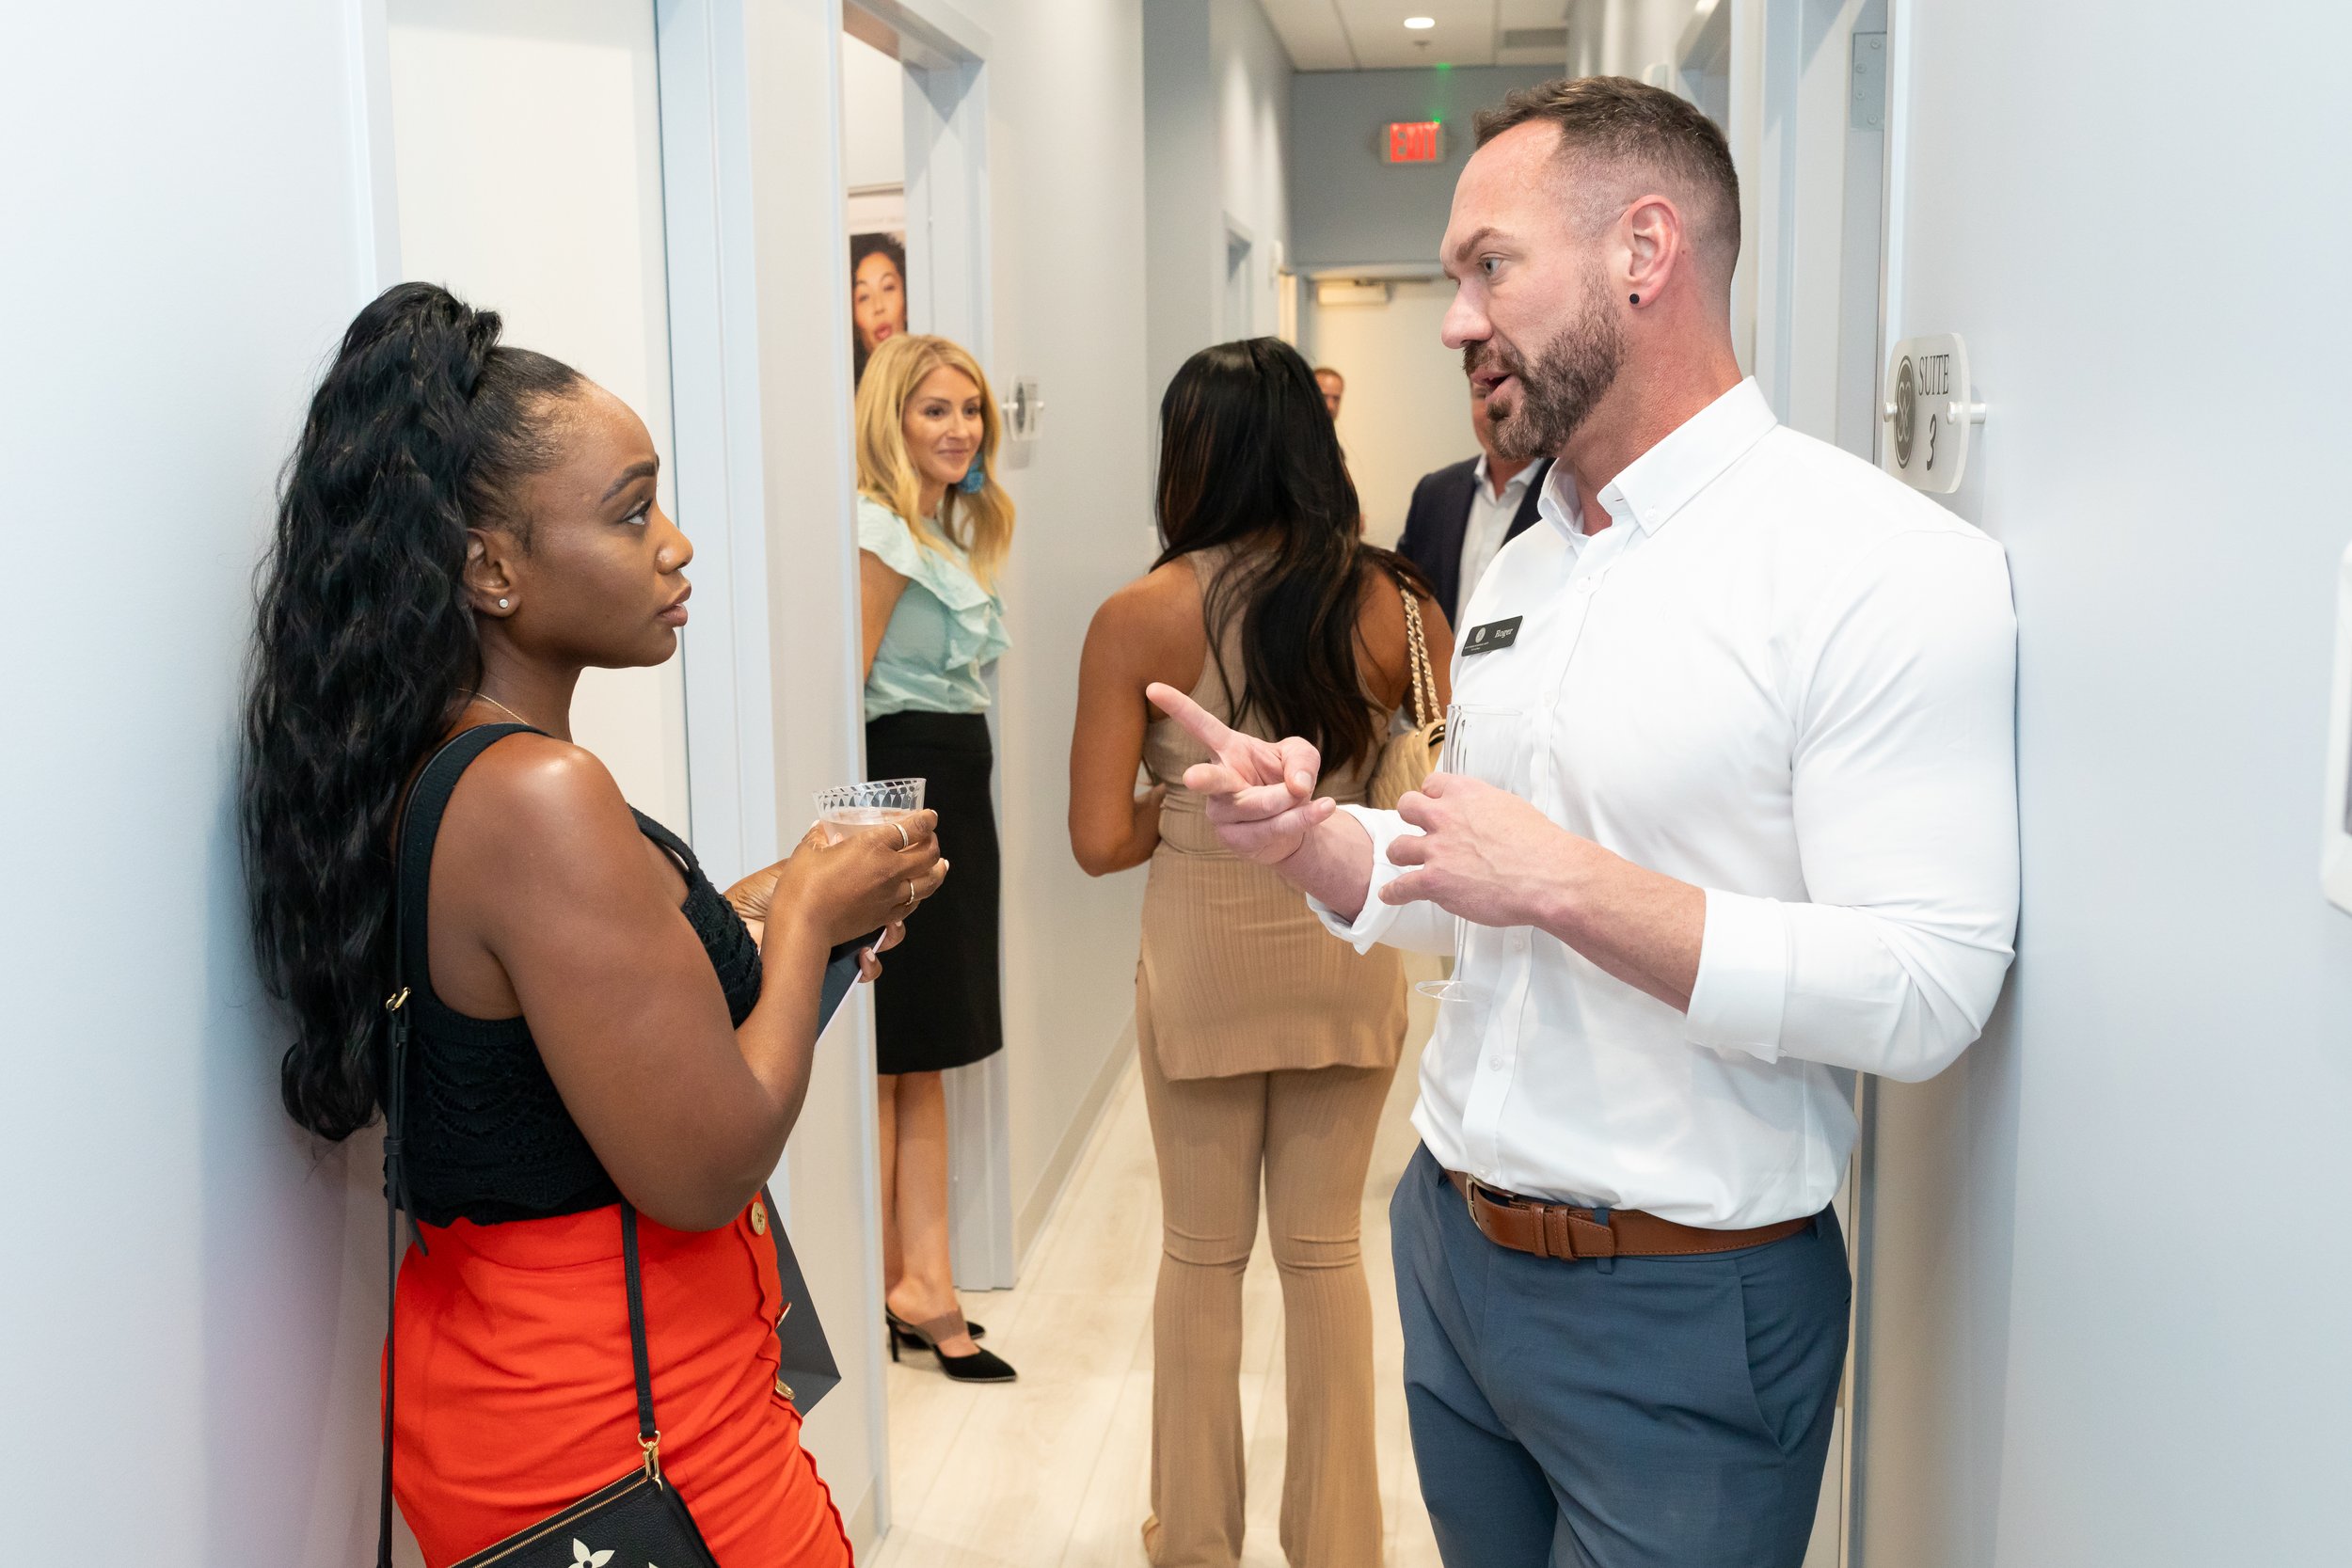 20230817-The Luxe List Atlanta-Southern Surgical Arts Beauty Bar Grand Opening-THU-BC-100.jpg (Copy)